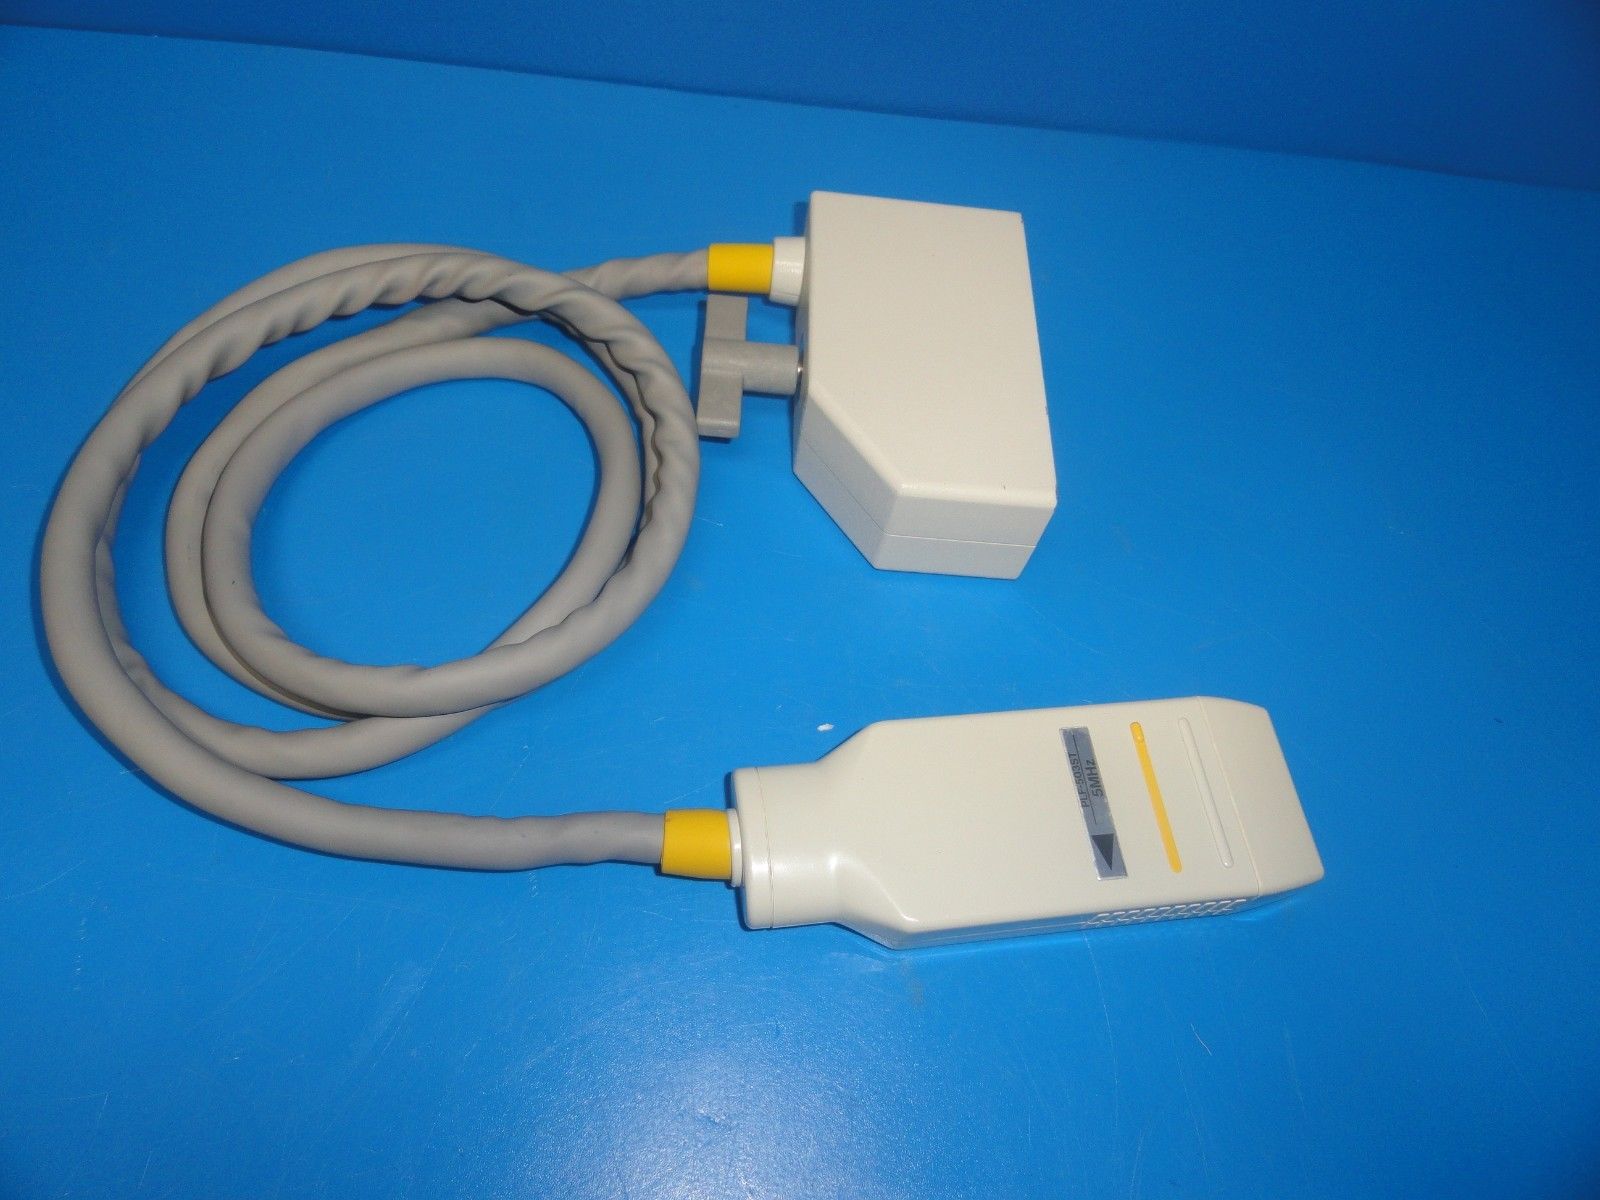 TOSHIBA PLF-503ST Linear Array  Probe for SSH-140 / 340A / 350A / SSA-270 (6426) DIAGNOSTIC ULTRASOUND MACHINES FOR SALE